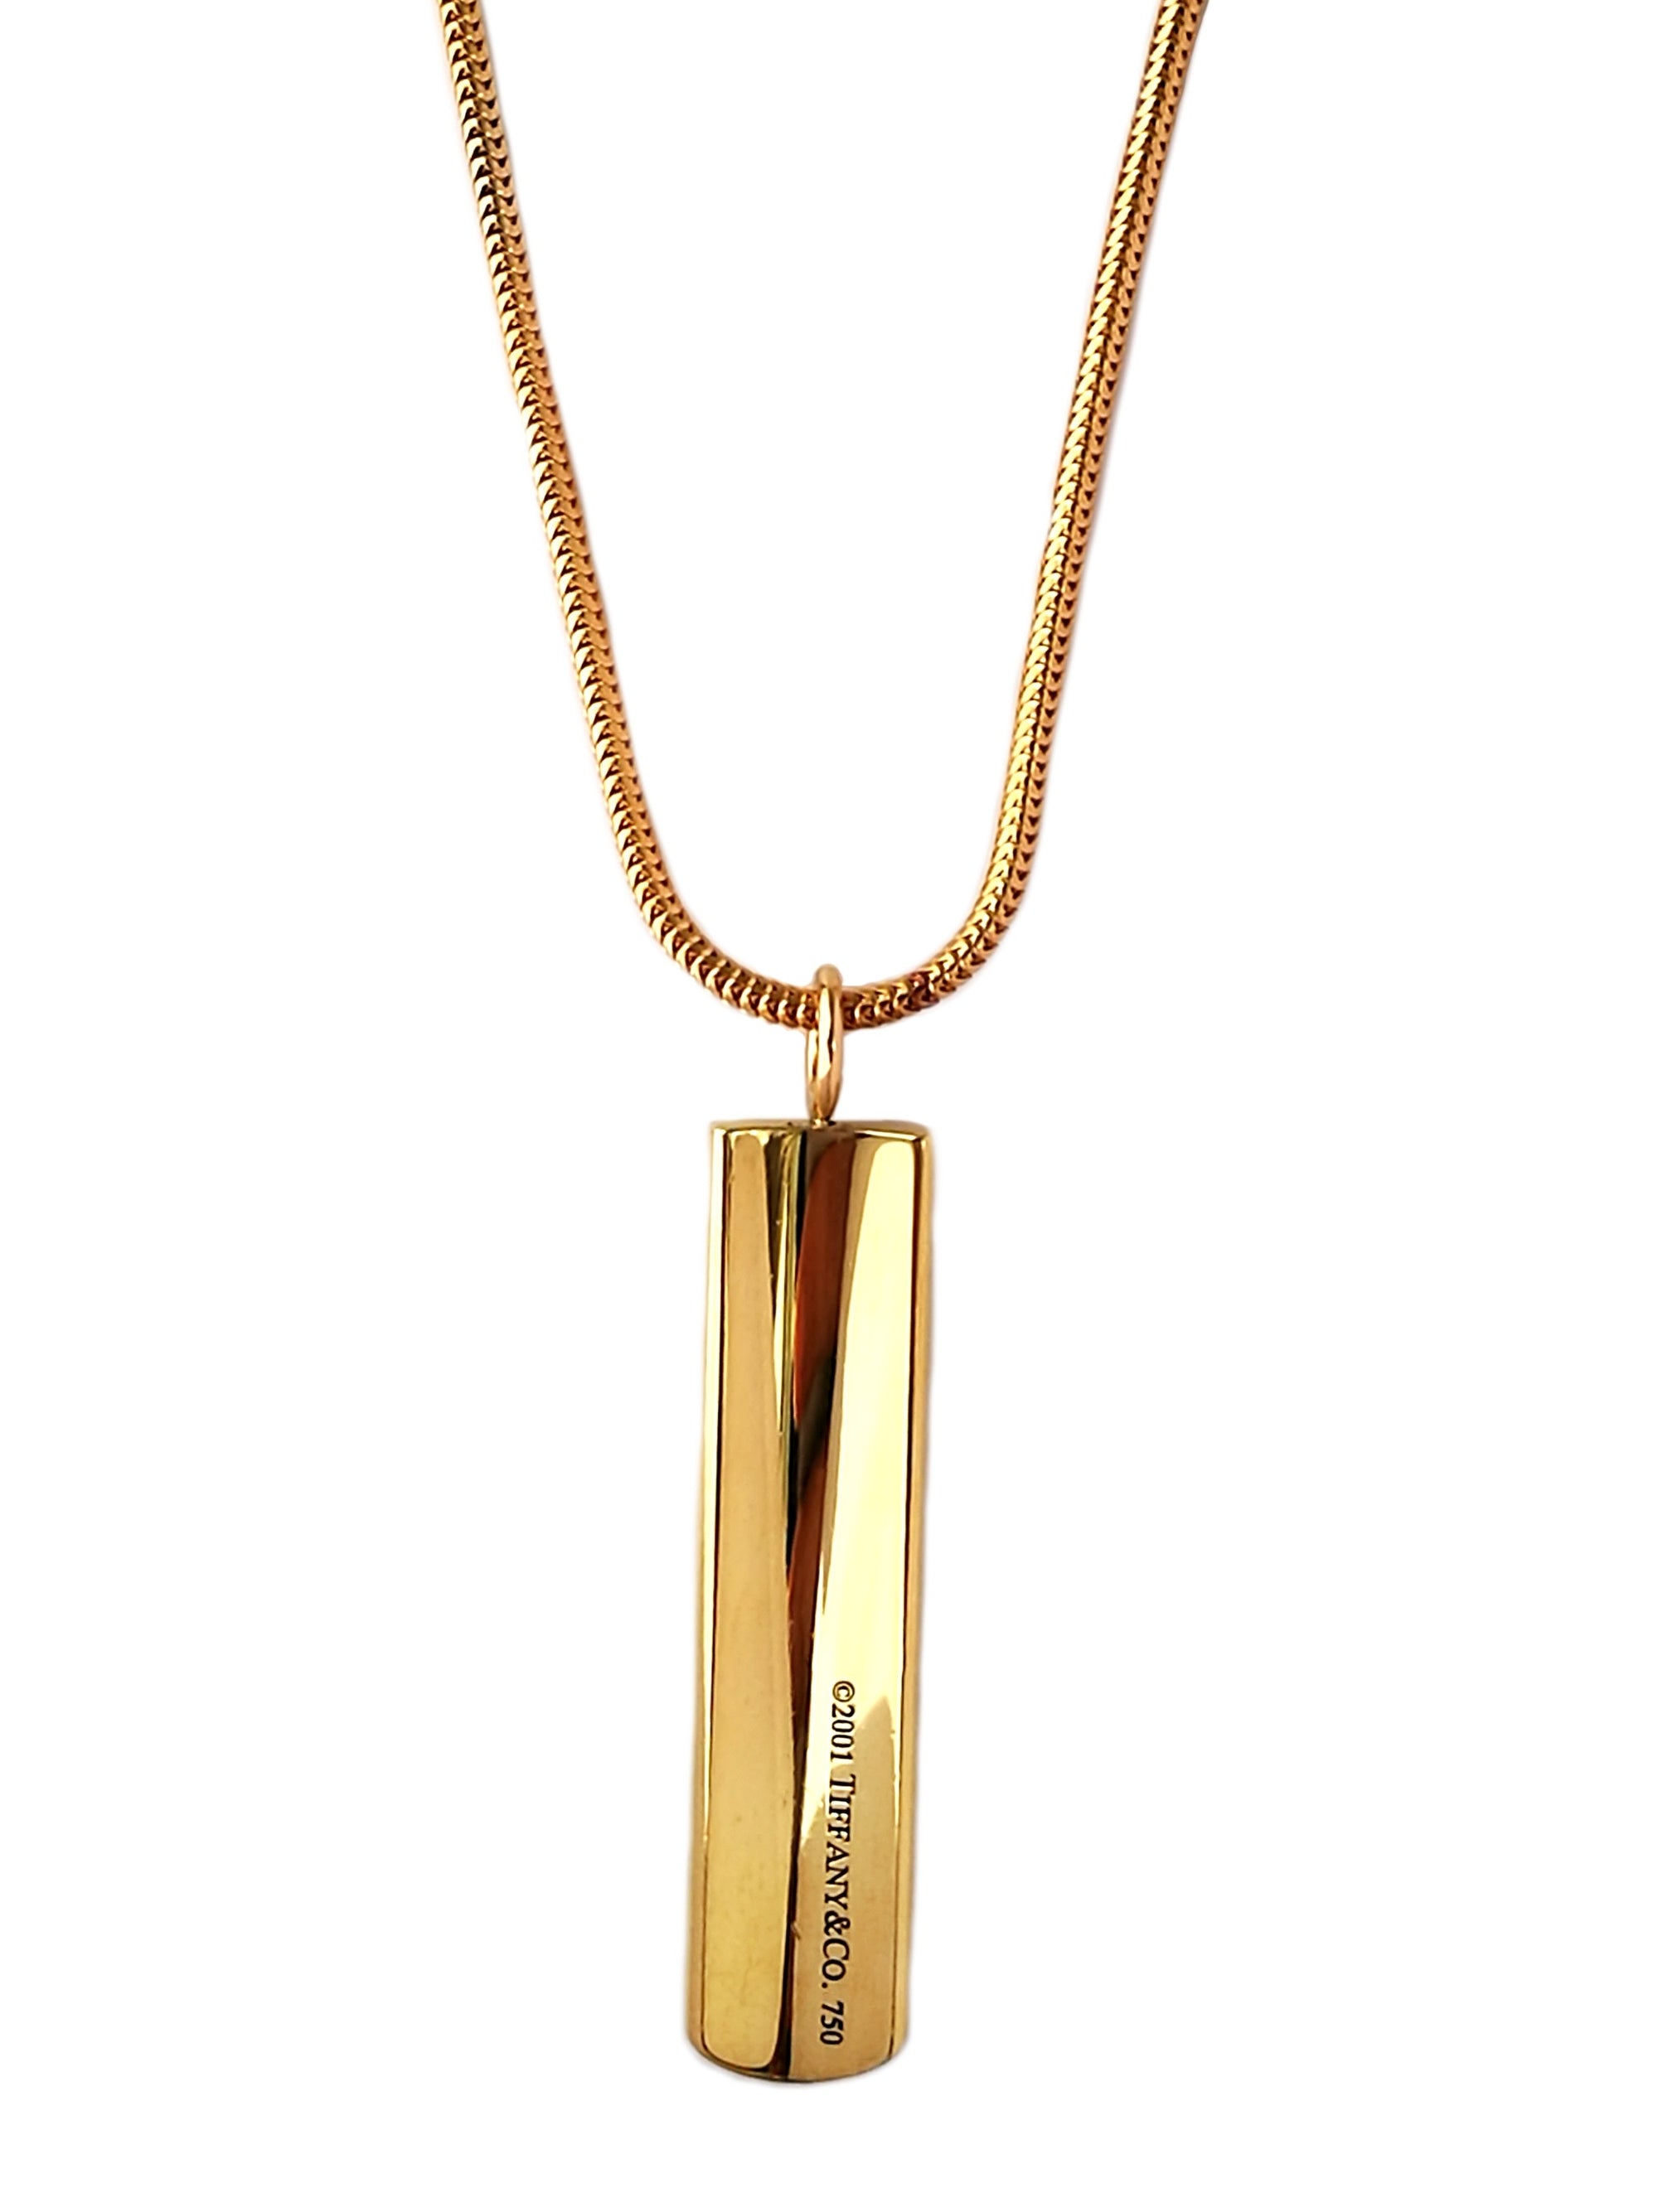 Tiffany & Co 1837 18k Yellow Gold Pendant Necklace 18in